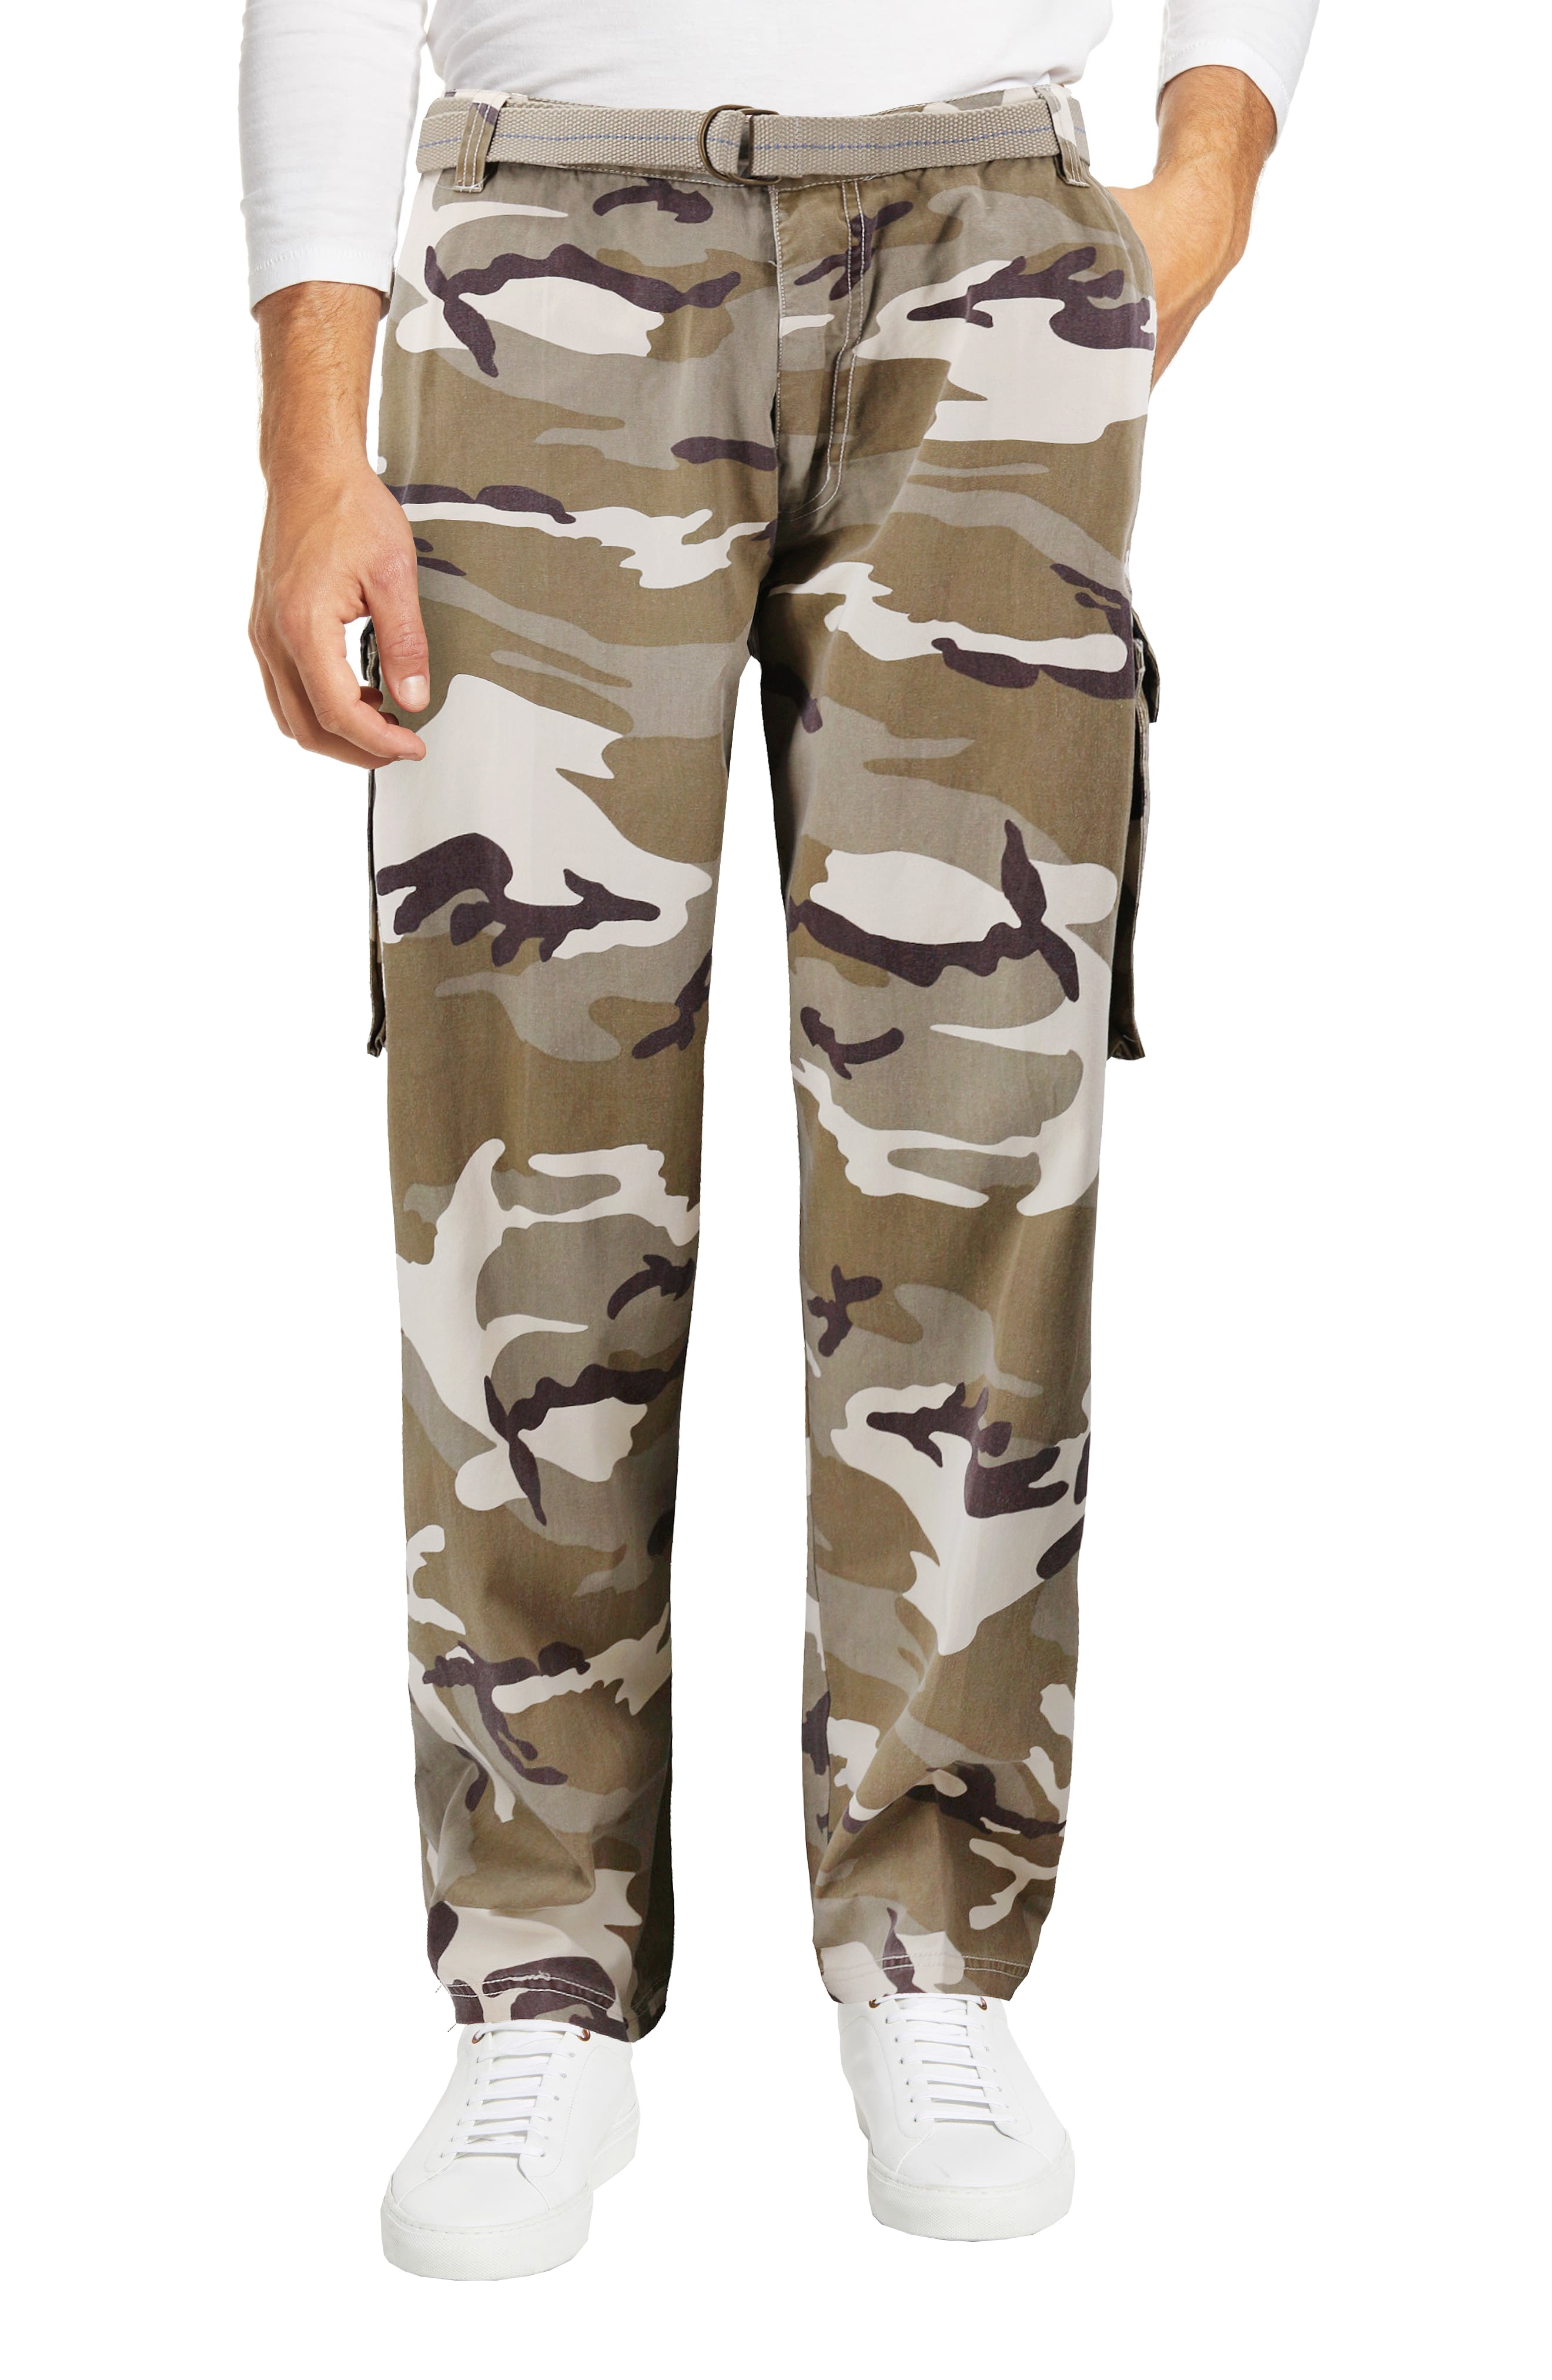 Men's Military Army Camo Cargo Combat Baggy Pant Tactical Pocket Hiking Trousers 